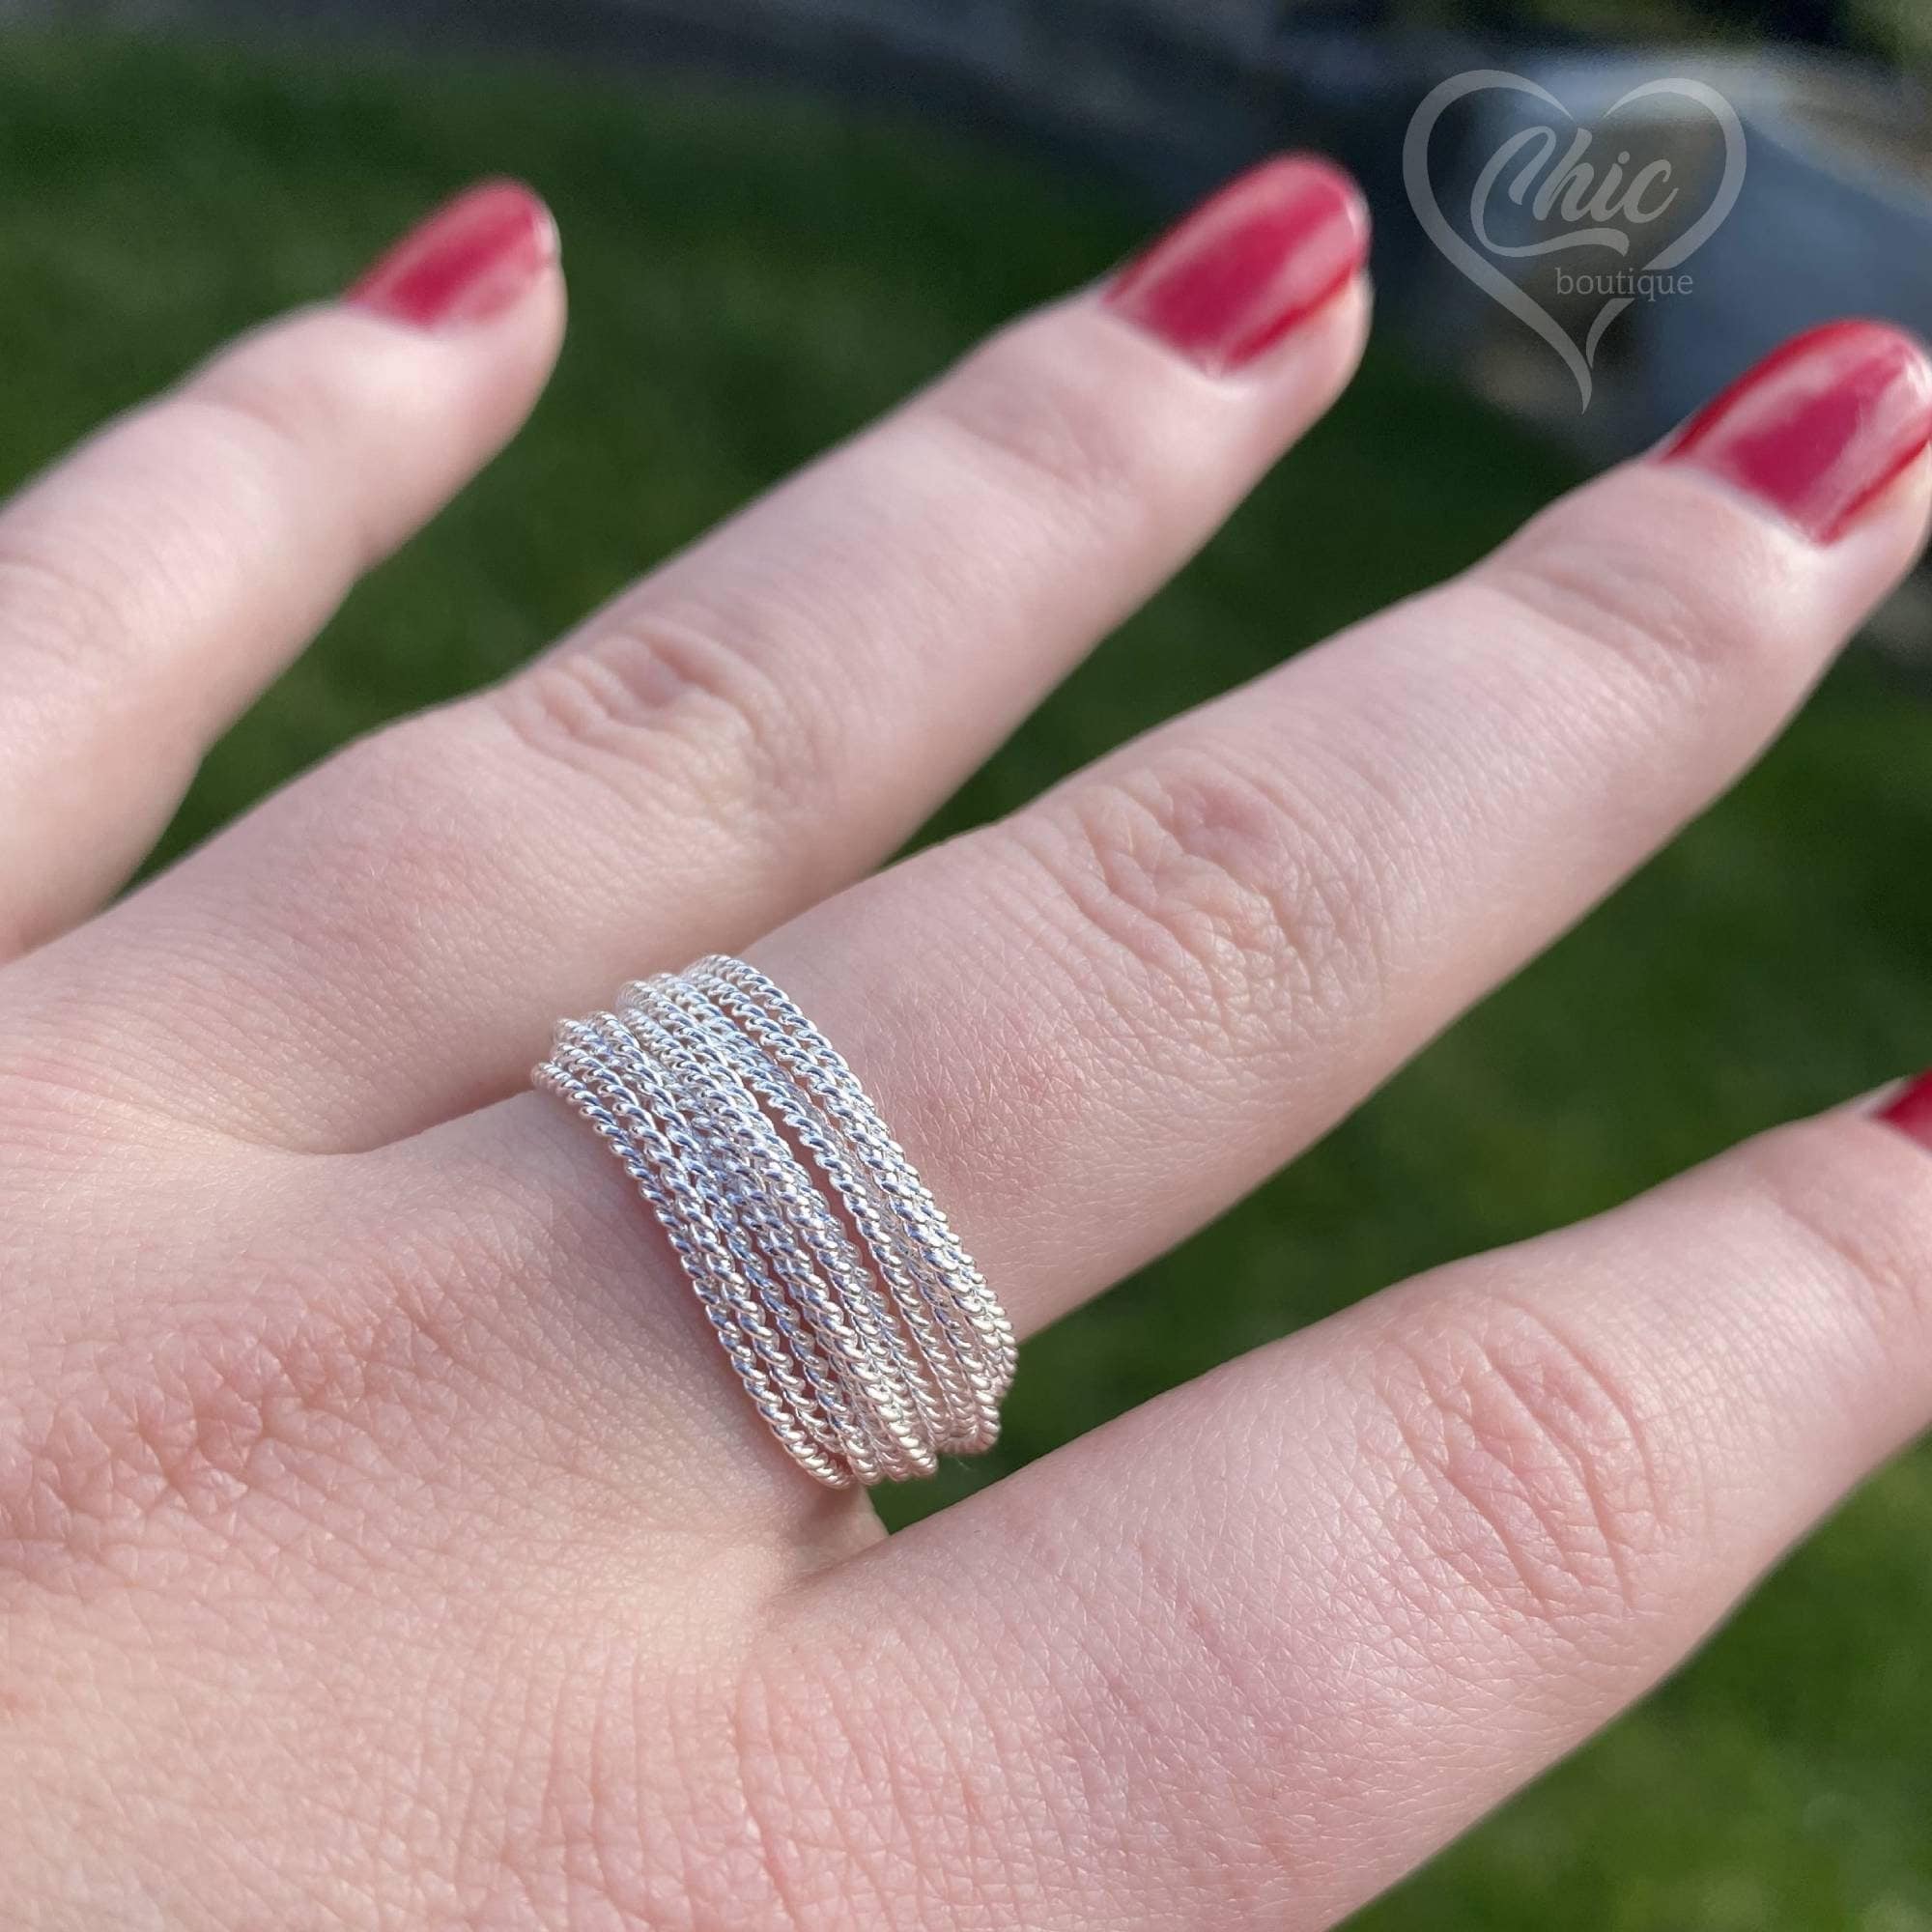 Stainless Steel Gold Jump Rings, 10 mm Open Twisted Bright Silver Ring  #836, Large Textured 12 Gauge